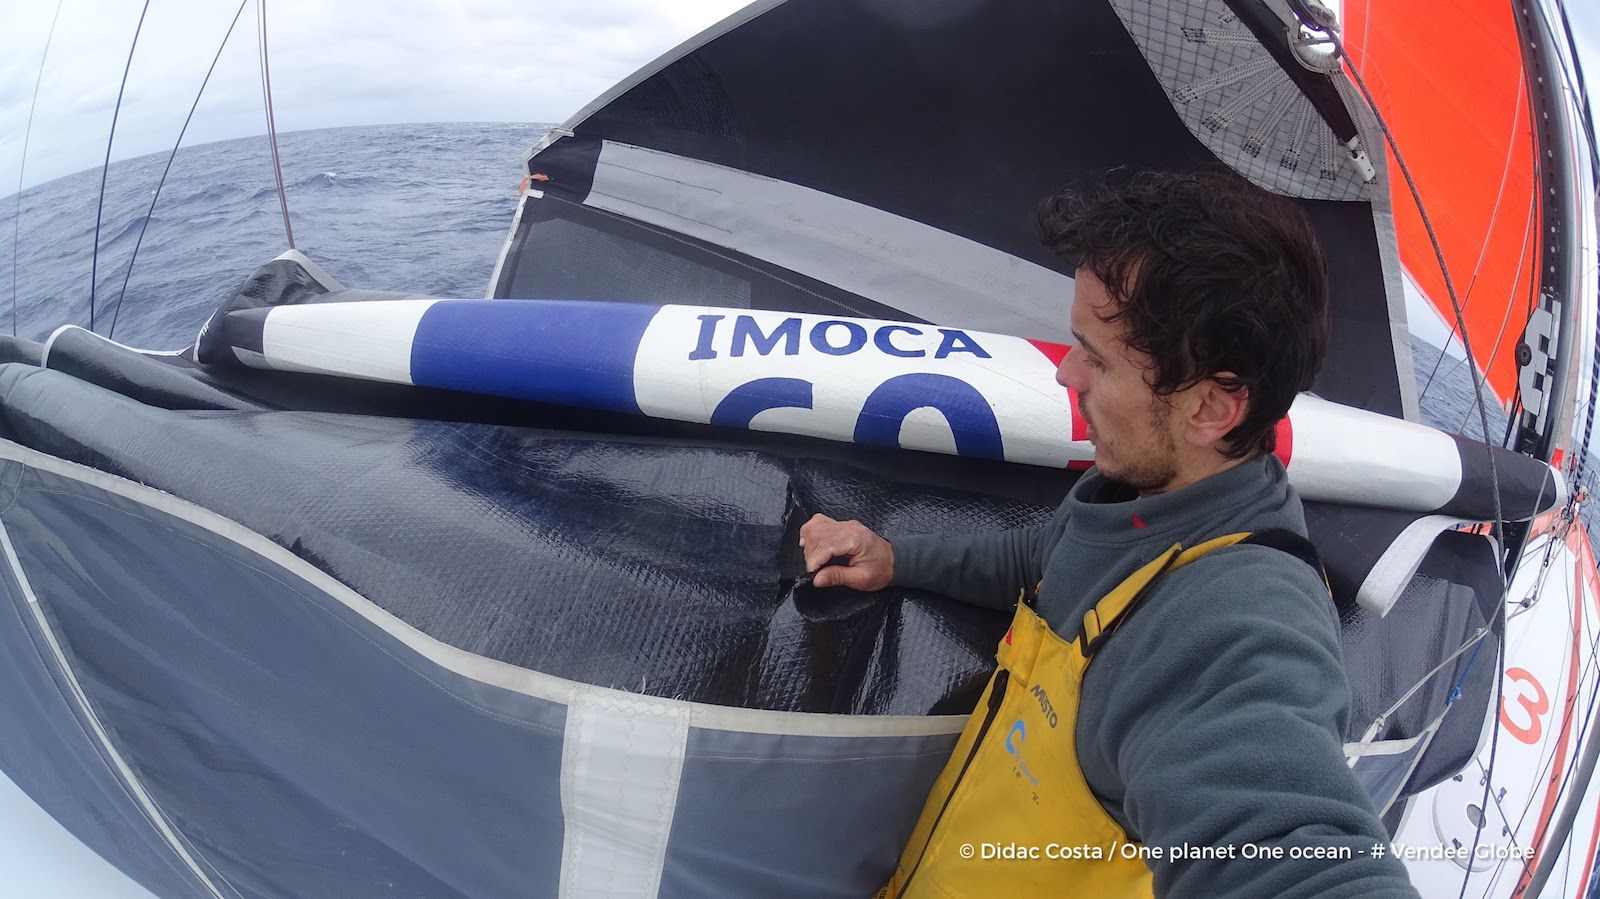 Didac Costa / One planet One Ocean - # Vendee Globe